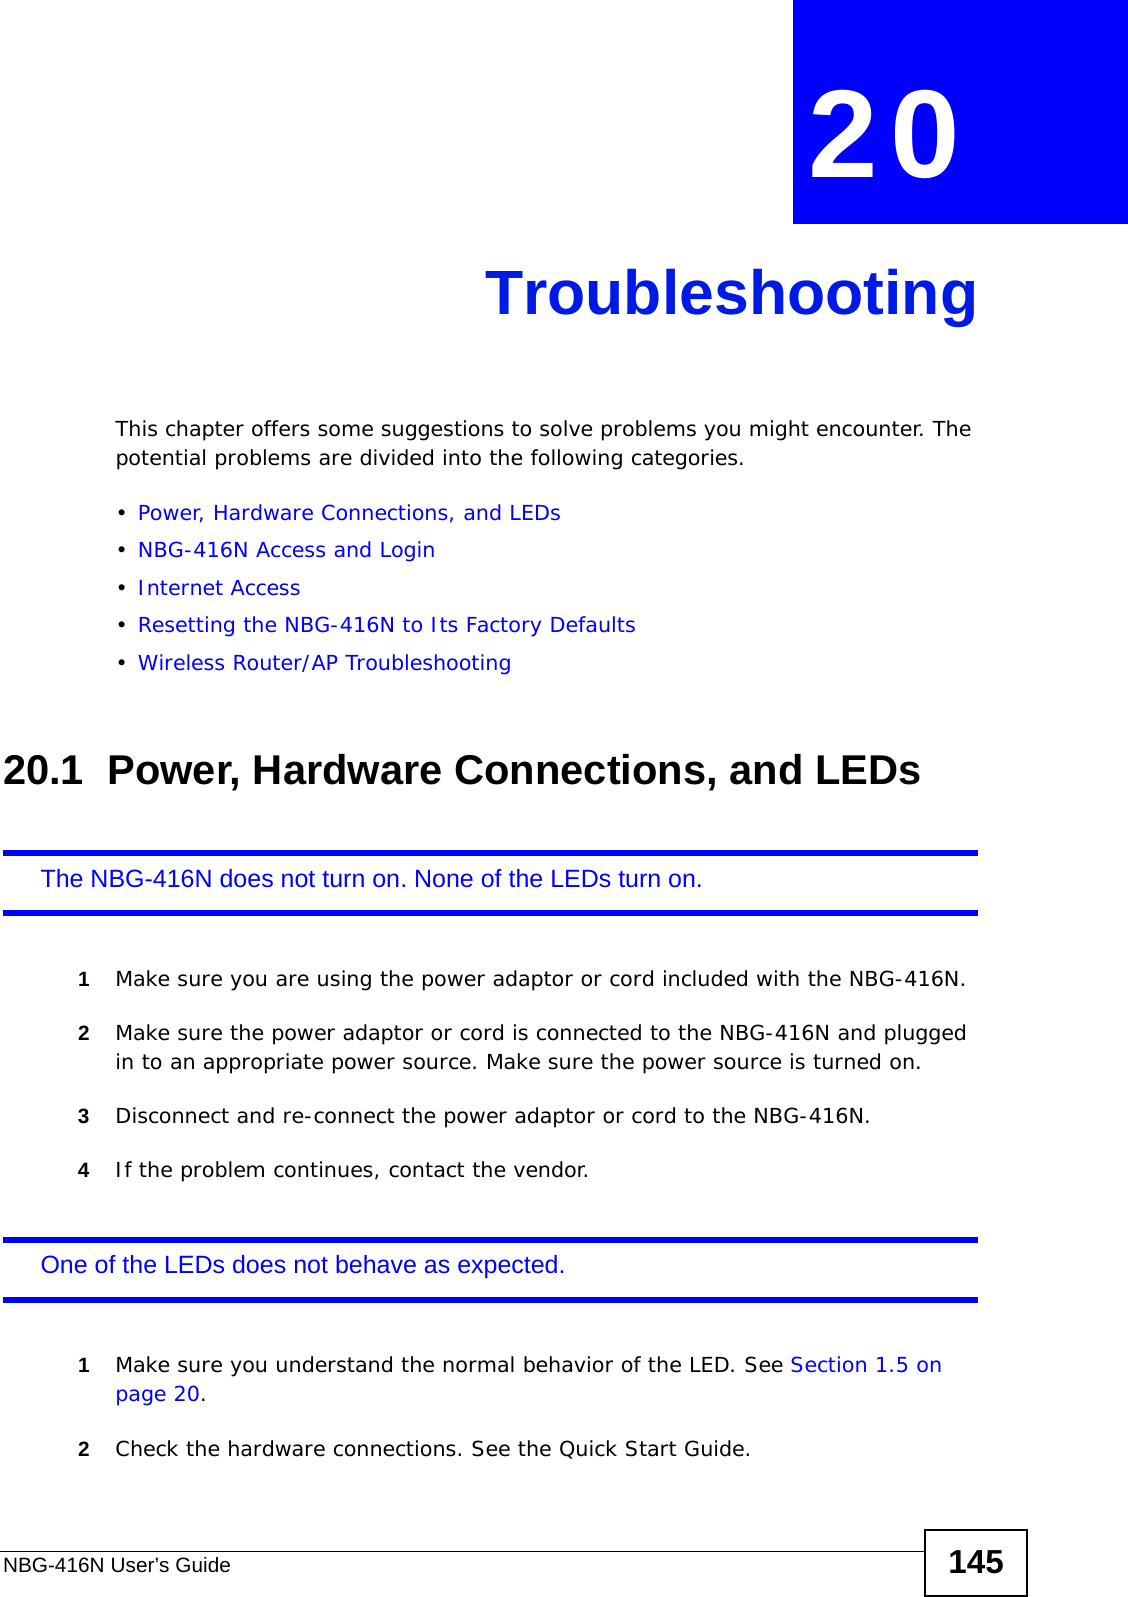 NBG-416N User’s Guide 145CHAPTER  20 TroubleshootingThis chapter offers some suggestions to solve problems you might encounter. The potential problems are divided into the following categories. •Power, Hardware Connections, and LEDs•NBG-416N Access and Login•Internet Access•Resetting the NBG-416N to Its Factory Defaults•Wireless Router/AP Troubleshooting20.1  Power, Hardware Connections, and LEDsThe NBG-416N does not turn on. None of the LEDs turn on.1Make sure you are using the power adaptor or cord included with the NBG-416N.2Make sure the power adaptor or cord is connected to the NBG-416N and plugged in to an appropriate power source. Make sure the power source is turned on.3Disconnect and re-connect the power adaptor or cord to the NBG-416N.4If the problem continues, contact the vendor.One of the LEDs does not behave as expected.1Make sure you understand the normal behavior of the LED. See Section 1.5 on page 20.2Check the hardware connections. See the Quick Start Guide. 